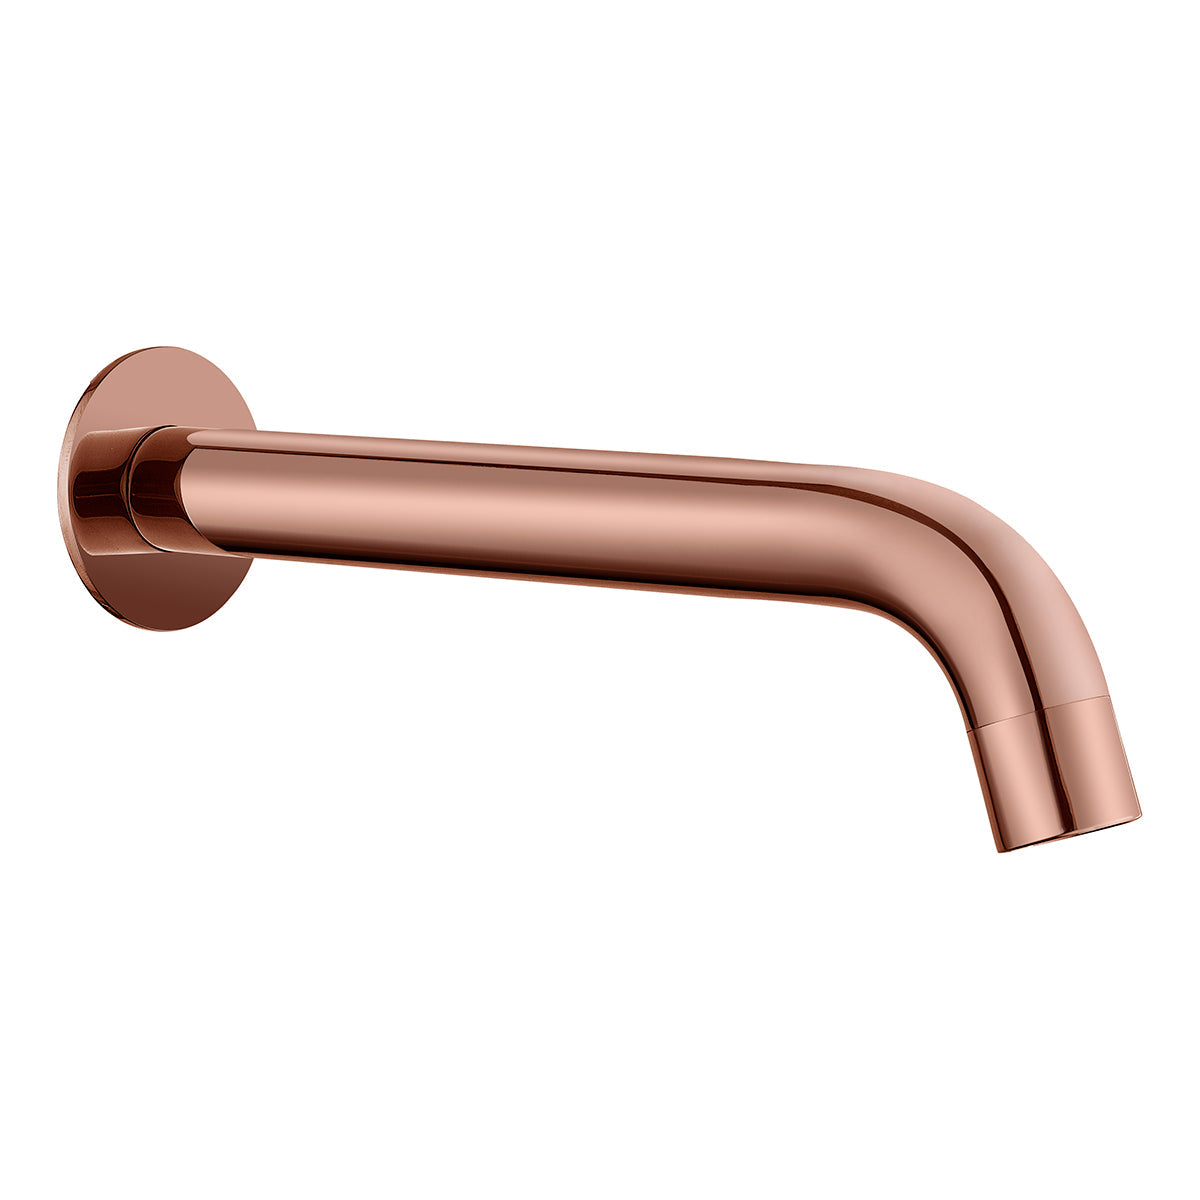 HELLYCAR IDEAL WALL OUTLET 210MM ROSE GOLD